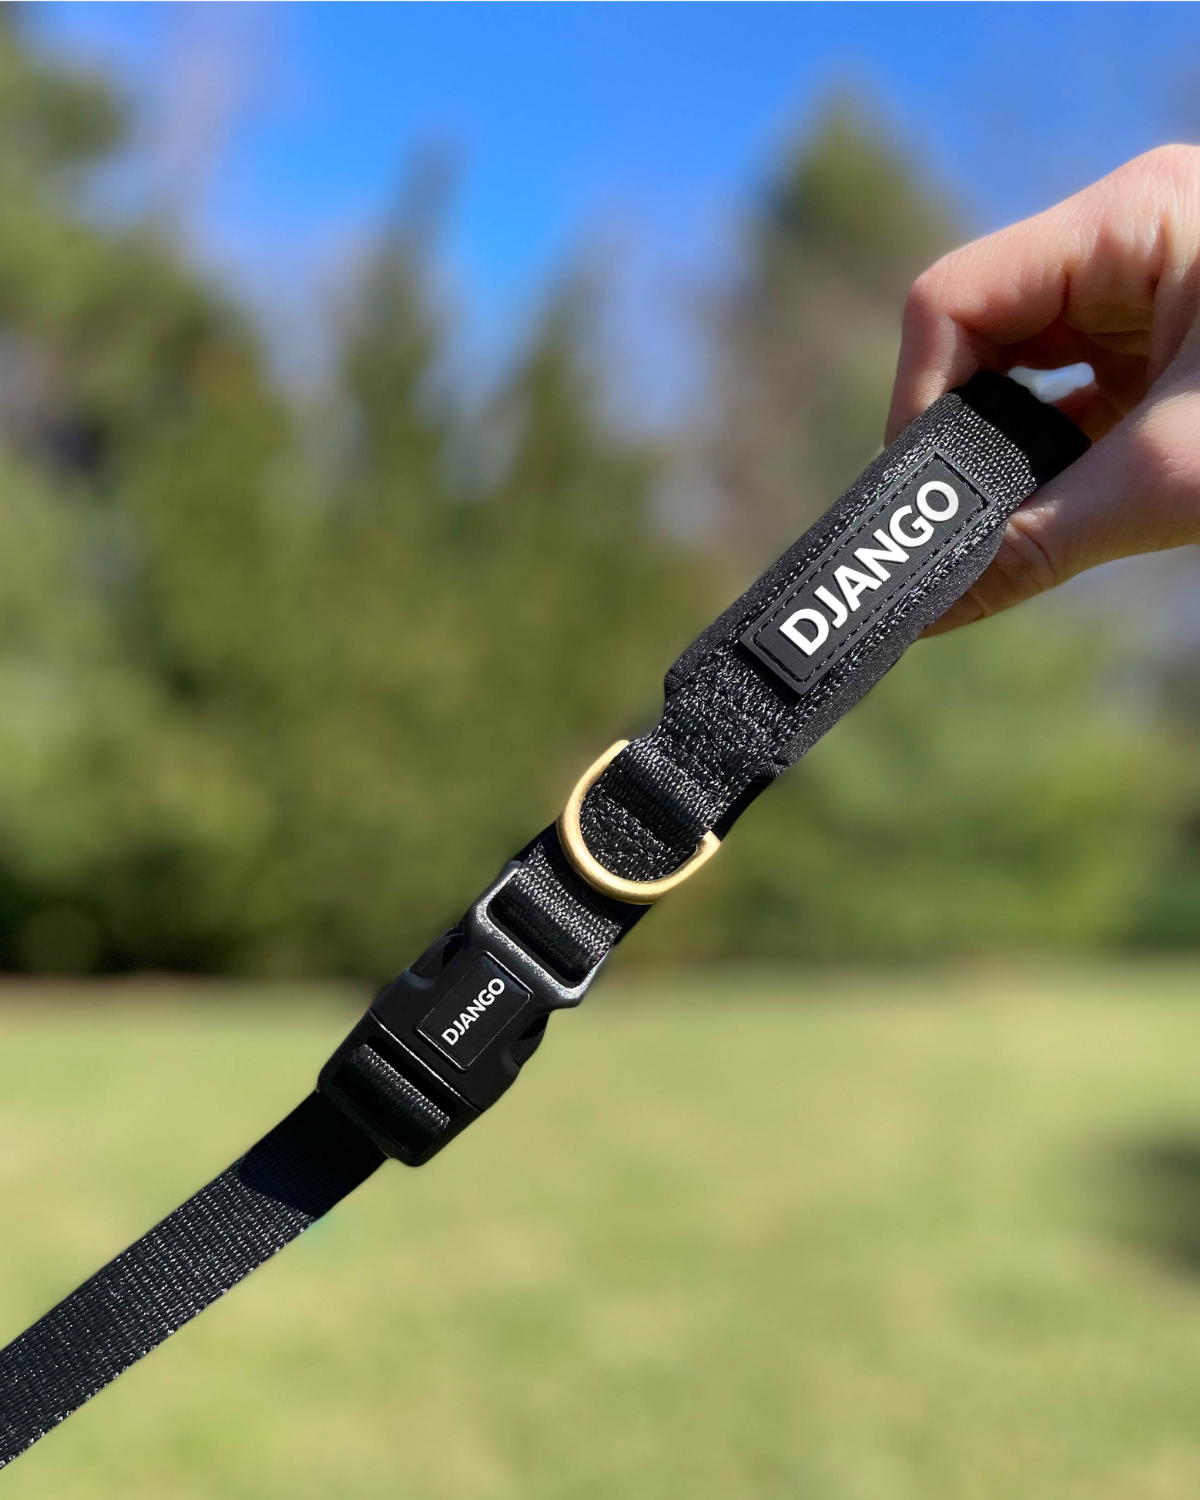 DJANGO’s Adjustable Hands-Free Adventure Dog Leash is a versatile leash that can be used as a 6.5 foot hand-held leash and an around-the-waist “hands-free” leash. The durable and stylish dog leash can also be used for temporary tie-ups (i.e. around your chair or table leg when you are out to lunch) and perfectly compliments your pup's favorite Adventure Collection harness and collar - djangobrand.com